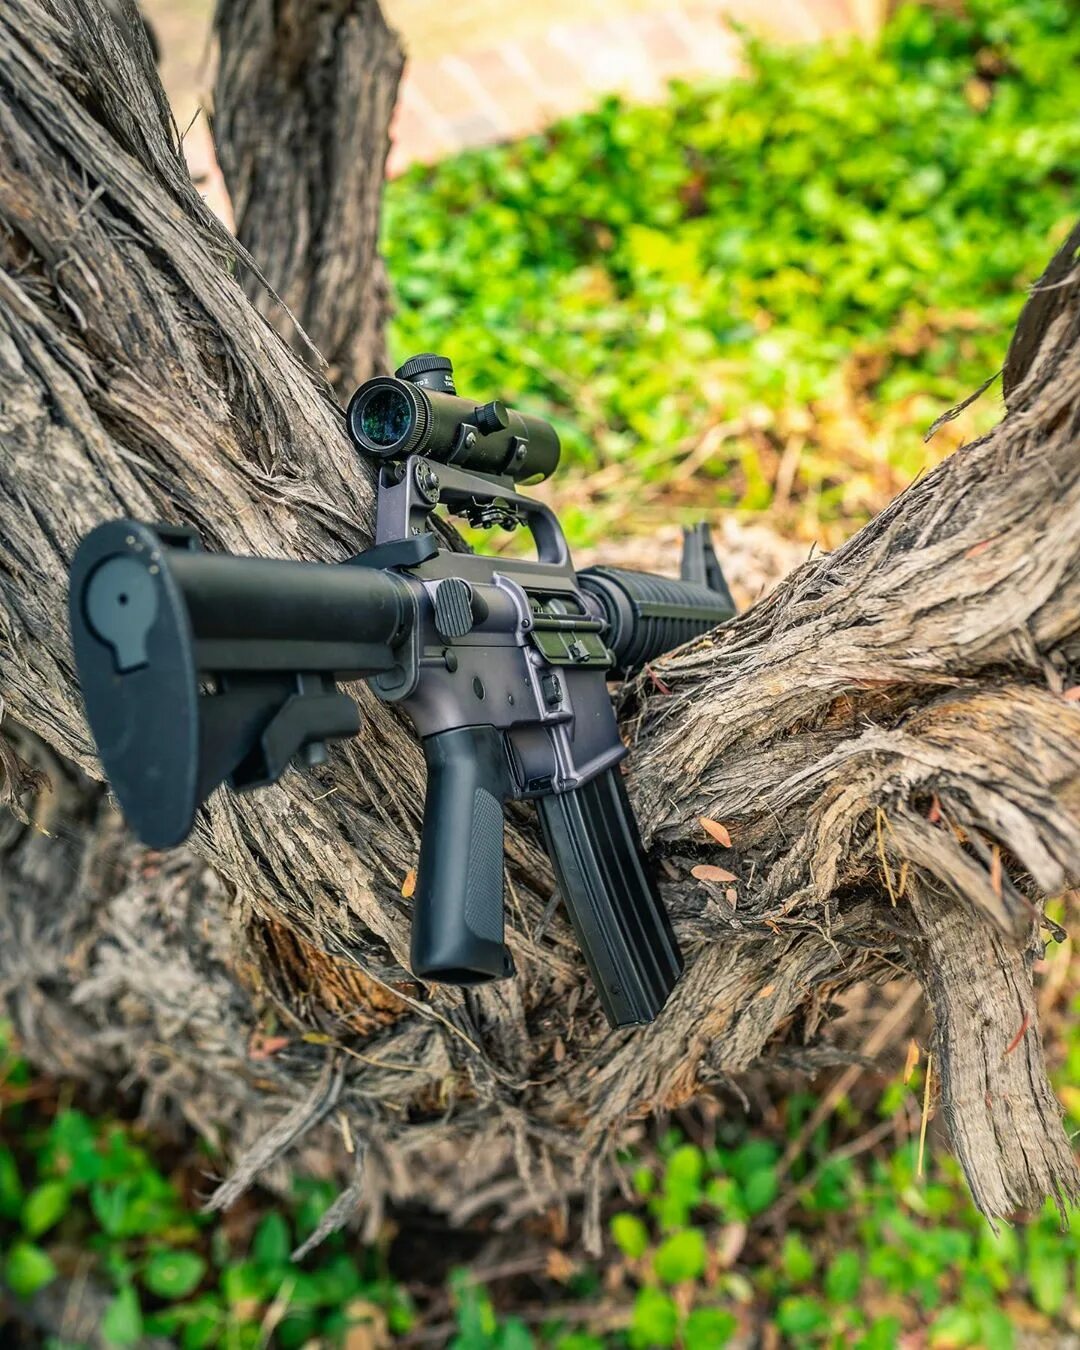 Instagramහි "I enjoy switching from my carry handle optic to the irons...